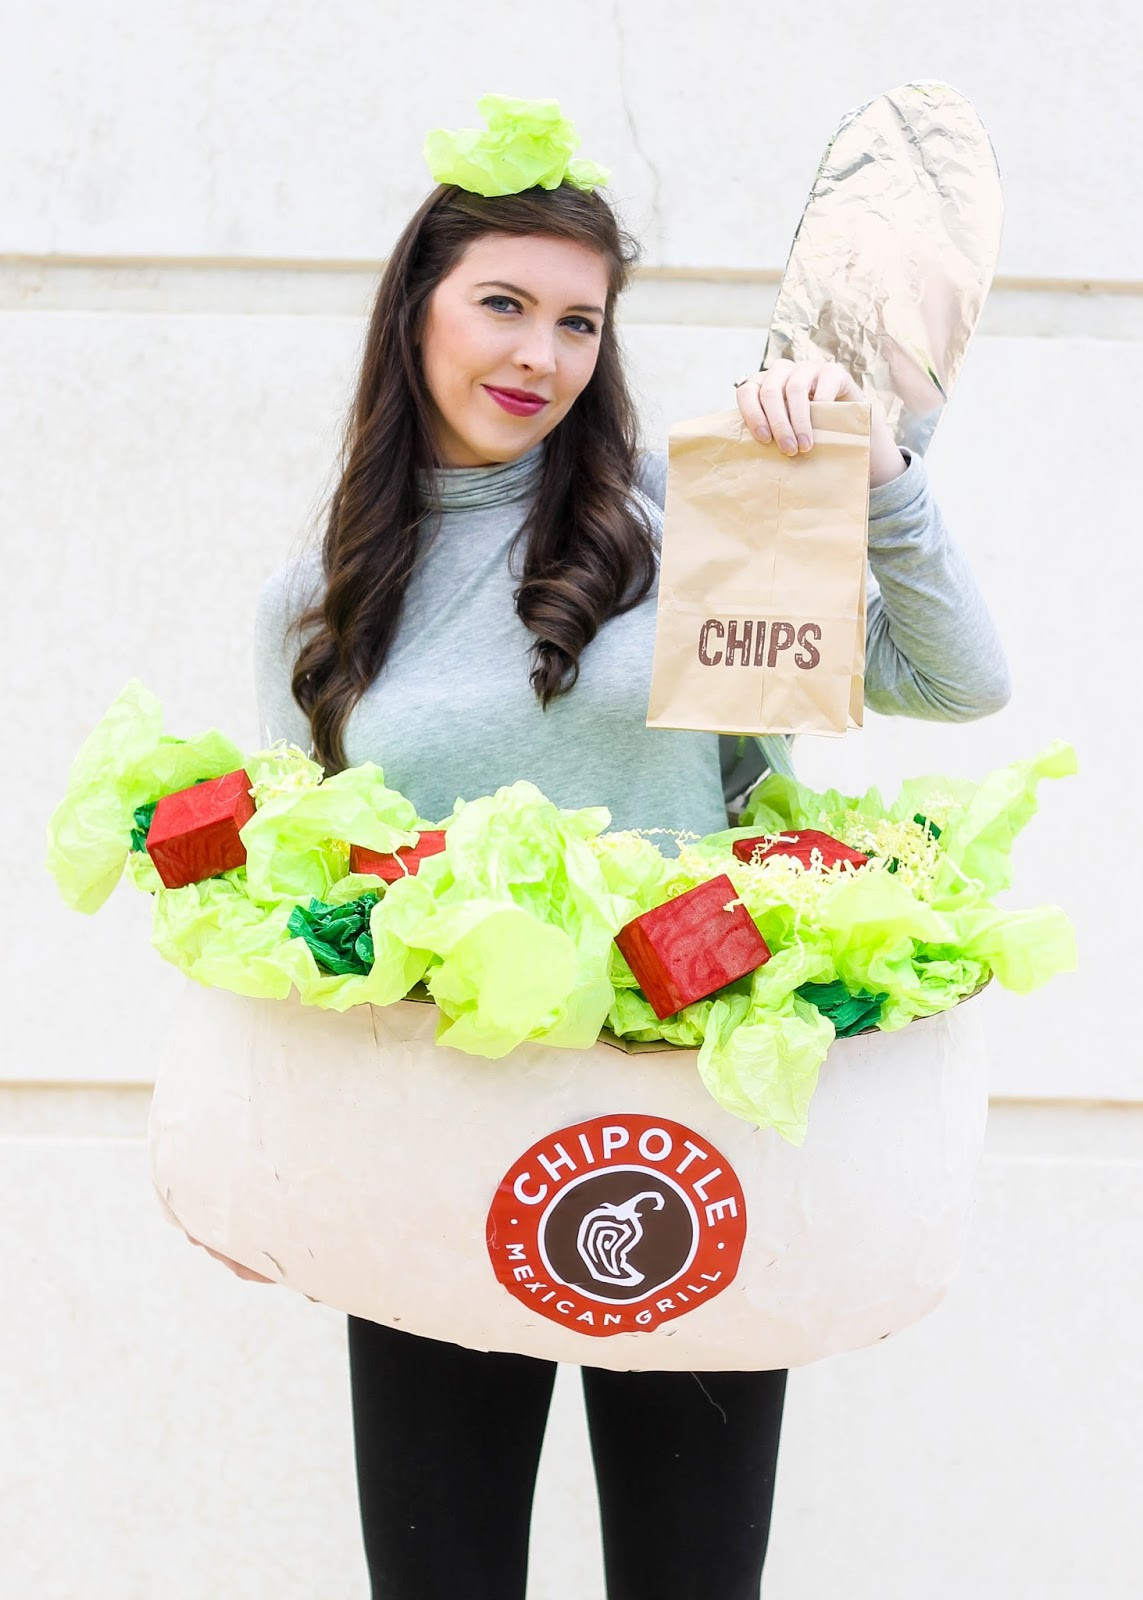 Sailor Costumes DIY
 Halloween Chipotle Costume DIY Pretty in the Pines